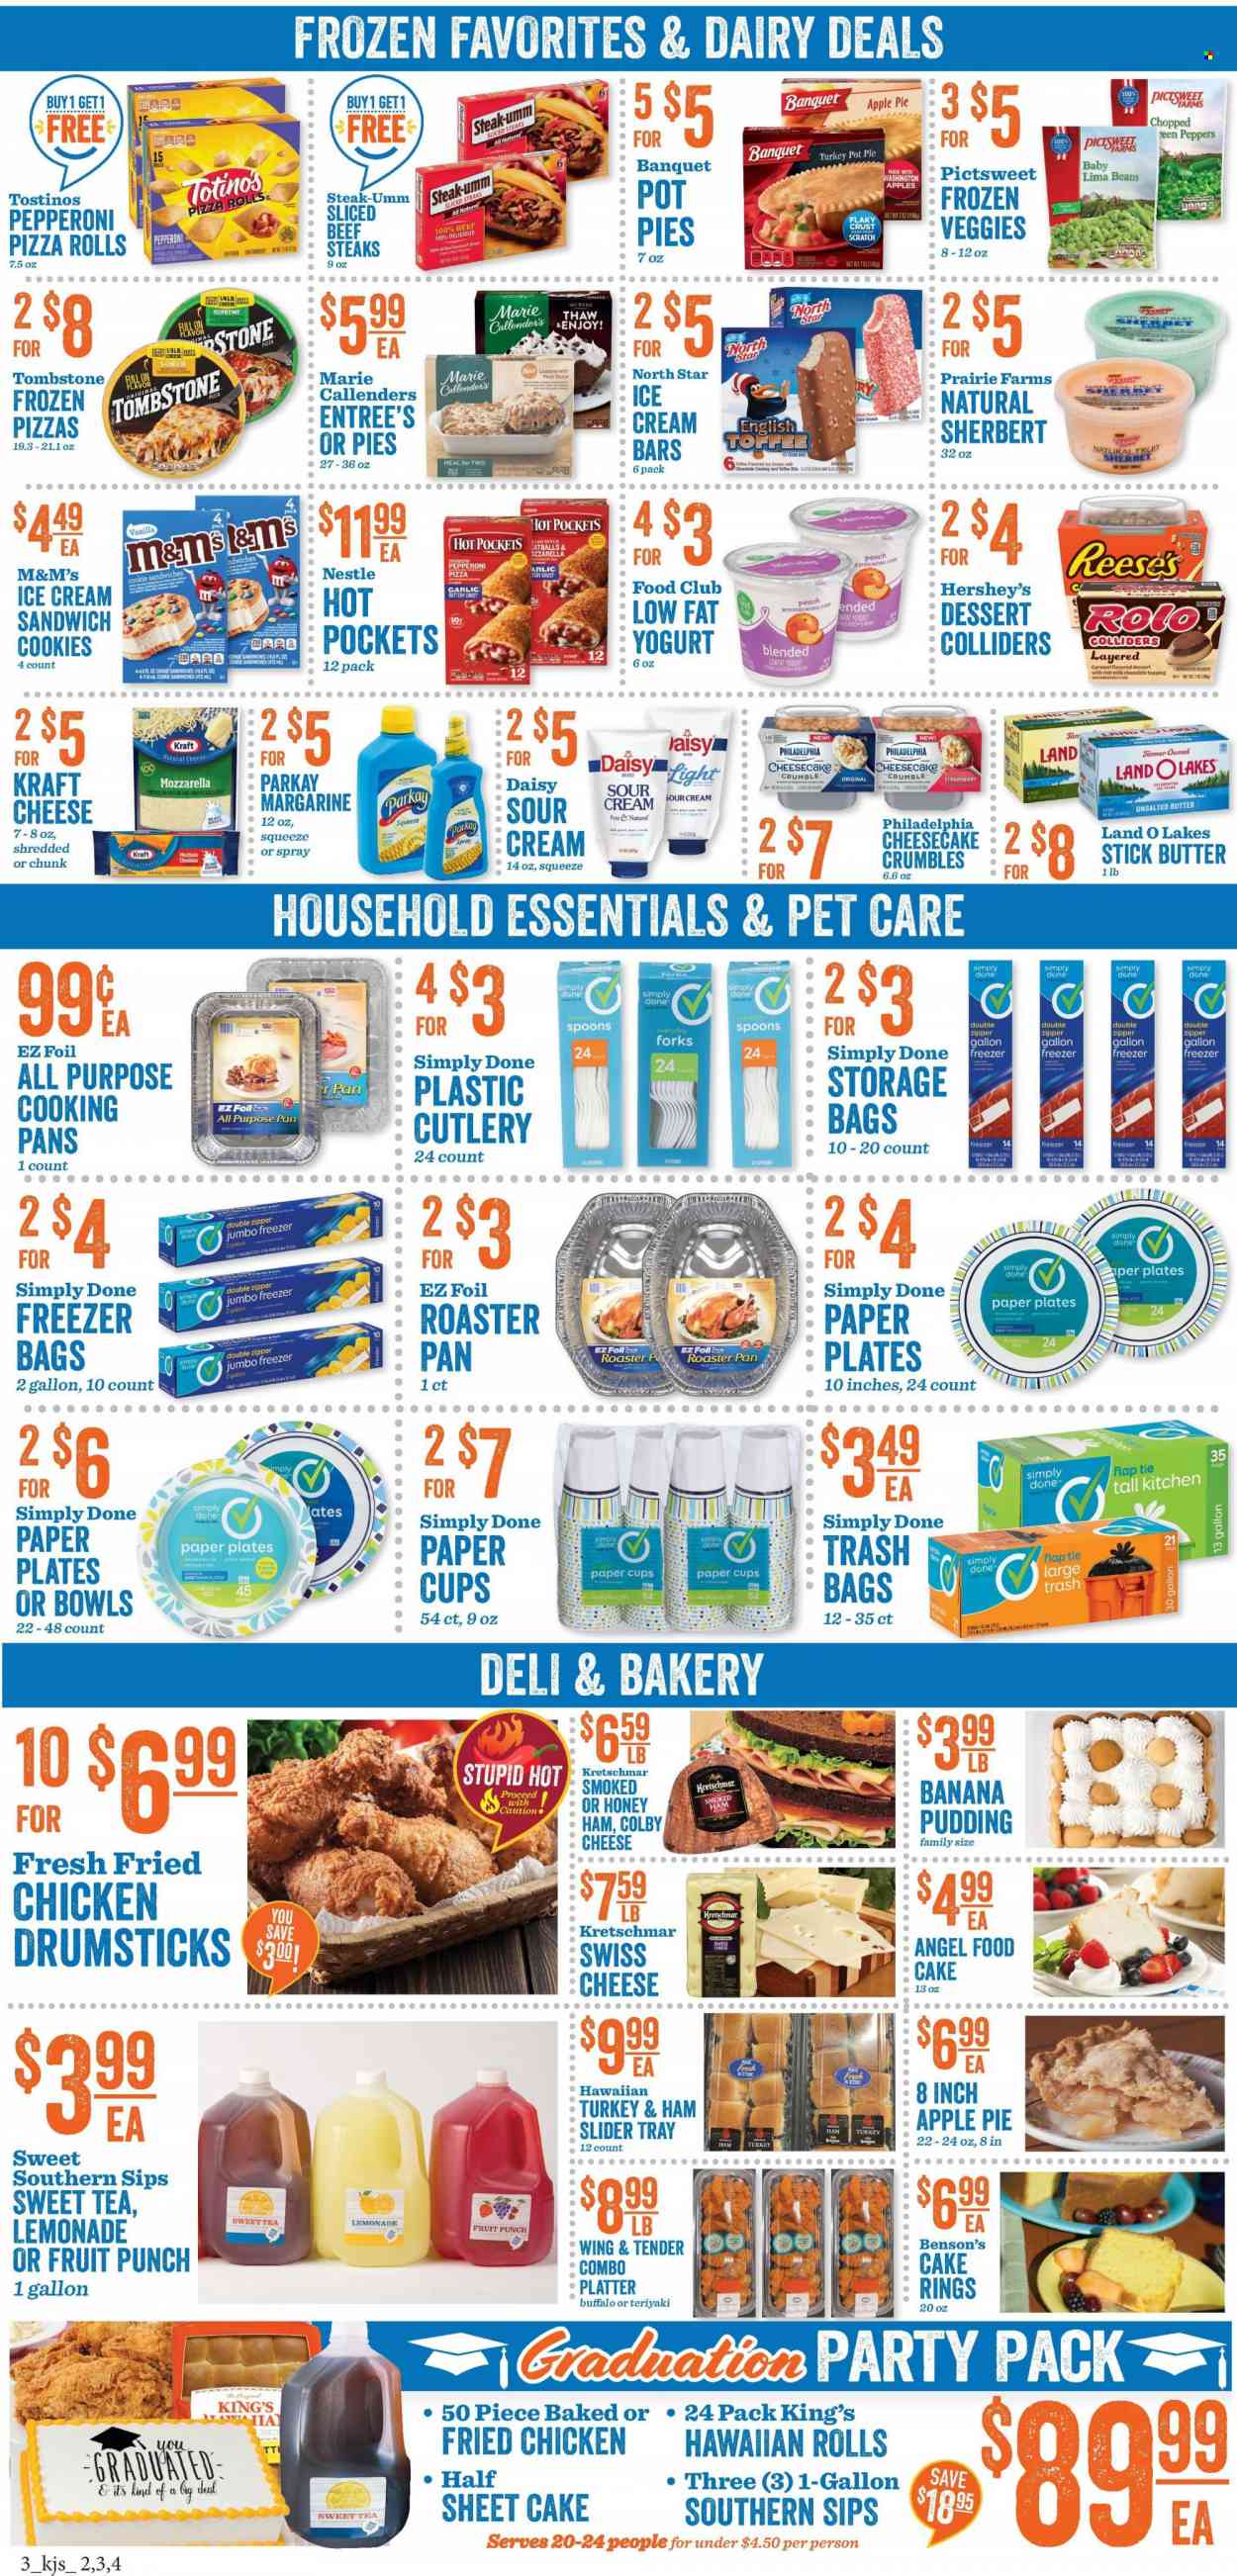 thumbnail - KJ´s Market Flyer - 05/25/2022 - 05/31/2022 - Sales products - cake, pizza rolls, apple pie, hawaiian rolls, pot pie, Angel Food, garlic, peppers, hot pocket, pizza, sauce, fried chicken, lasagna meal, Marie Callender's, Kraft®, ham, smoked ham, pepperoni, Colby cheese, swiss cheese, Philadelphia, cheddar, pudding, margarine, sour cream, ice cream, sherbet, ice cream sandwich, Reese's, Hershey's, lima beans, cookies, milk chocolate, Nestlé, sandwich cookies, M&M's, topping, caramel, lemonade, fruit punch, tea, beef meat, beef steak, steak, pork chops, pork meat, trash bags, storage bag, spoon, tray, plate, pan, cup, disposable cutlery, freezer bag, paper, paper plate, party cups. Page 3.